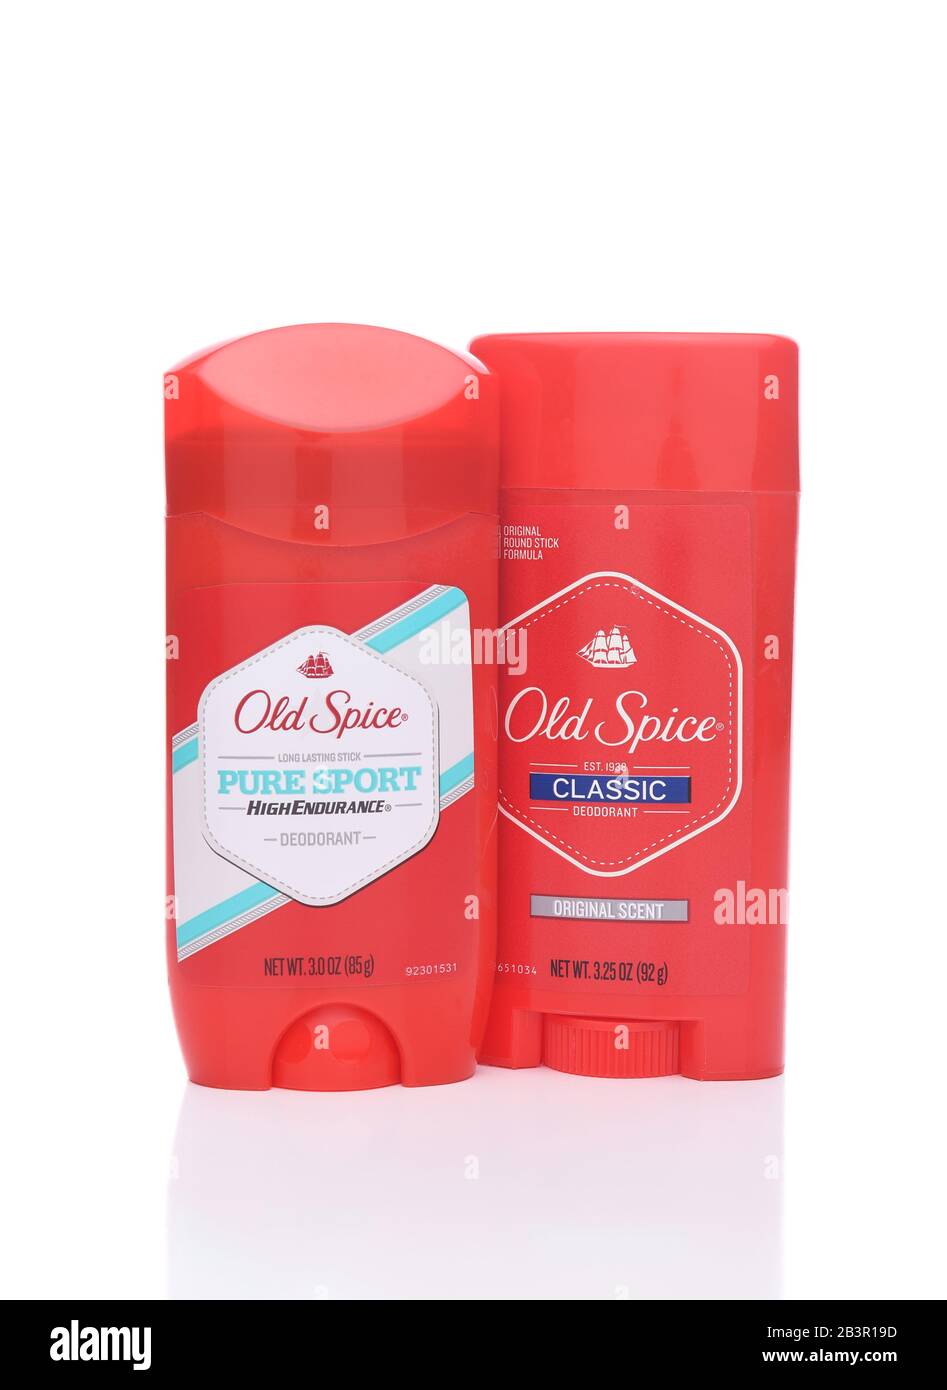 old spice product line